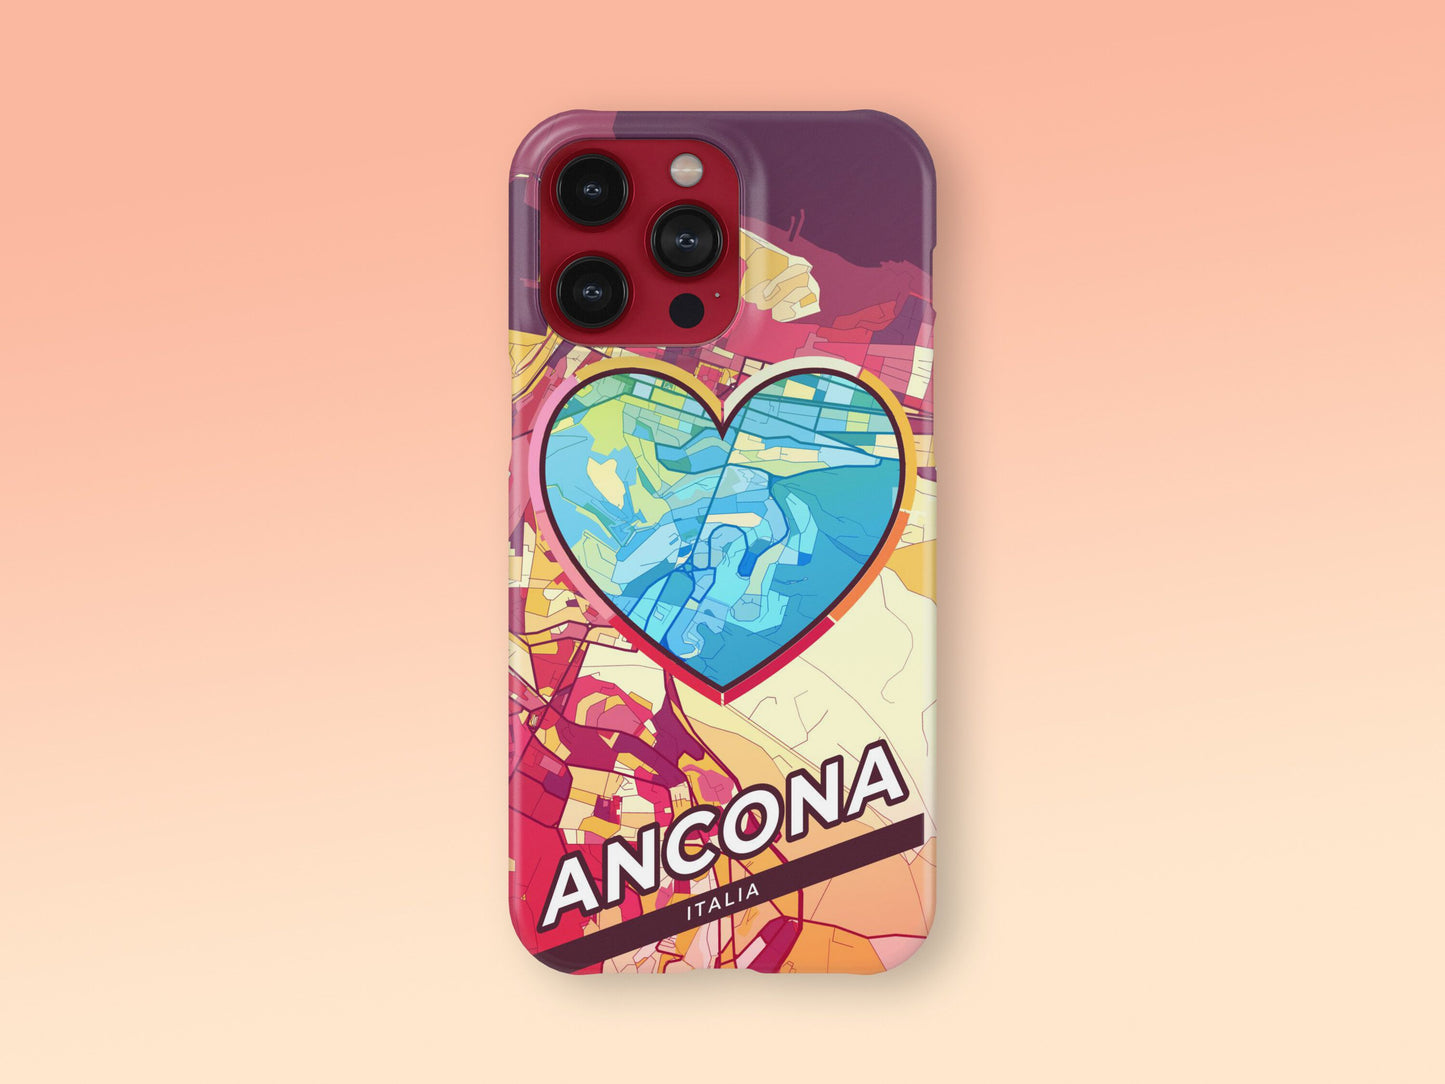 Ancona Italy slim phone case with colorful icon. Birthday, wedding or housewarming gift. Couple match cases. 2